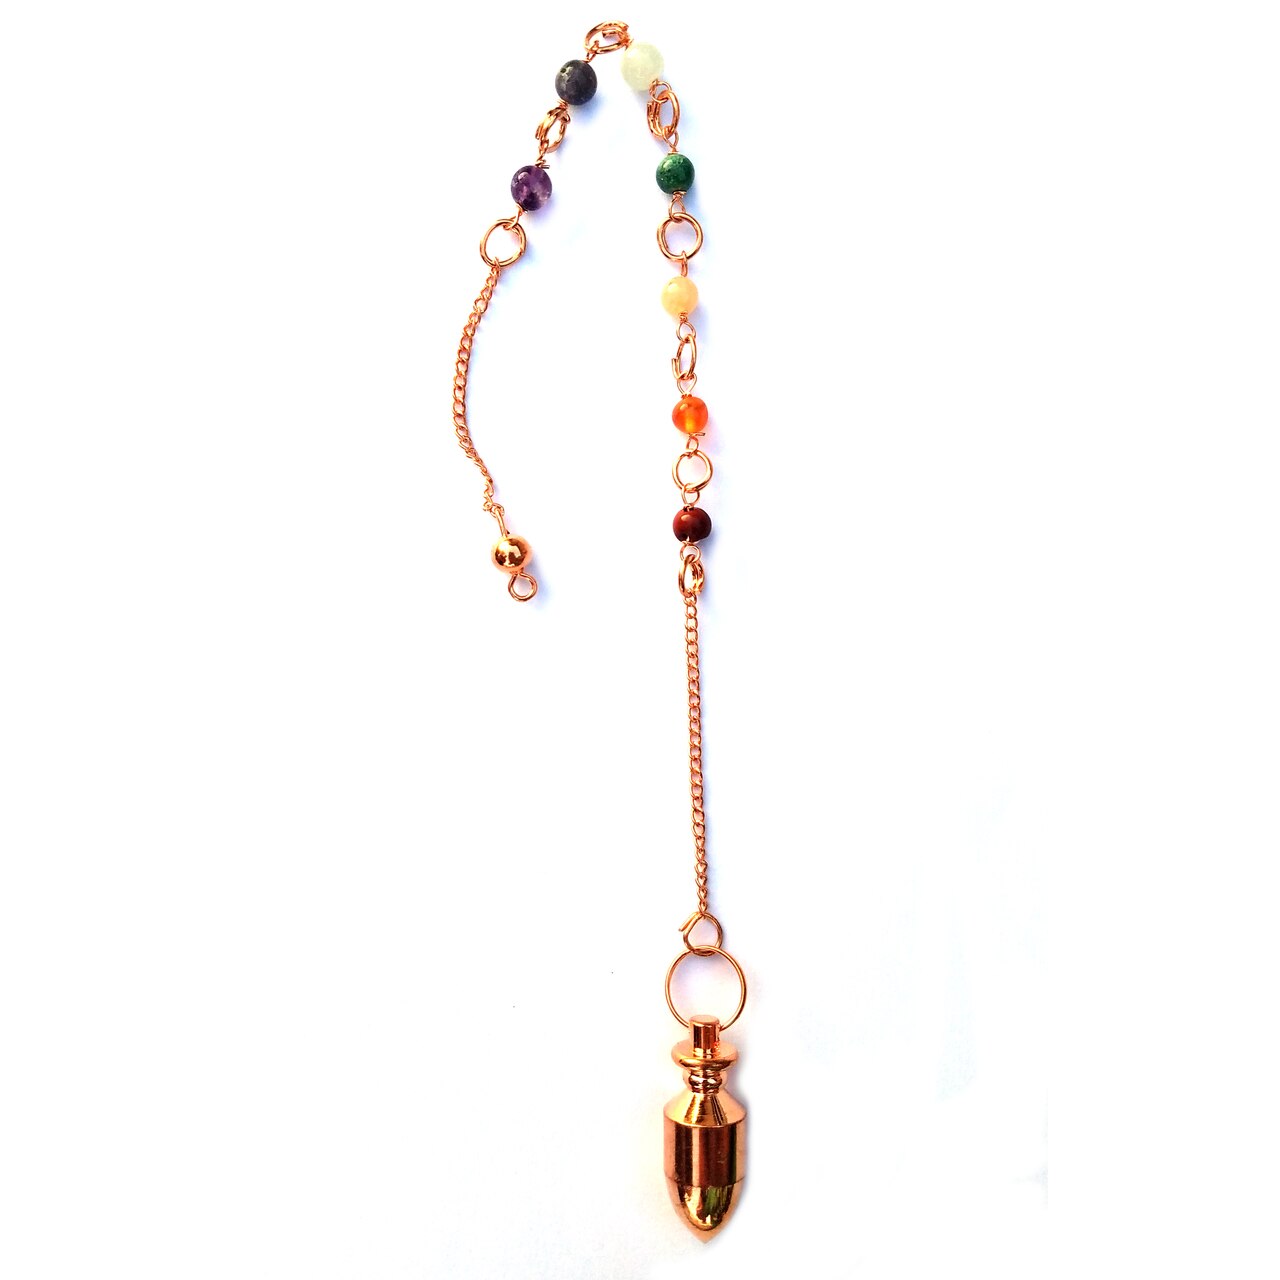 Chakra Copper Pendulum #7 with Sphere Bob for Divination, Scrying, Dowsing & Fortune Telling